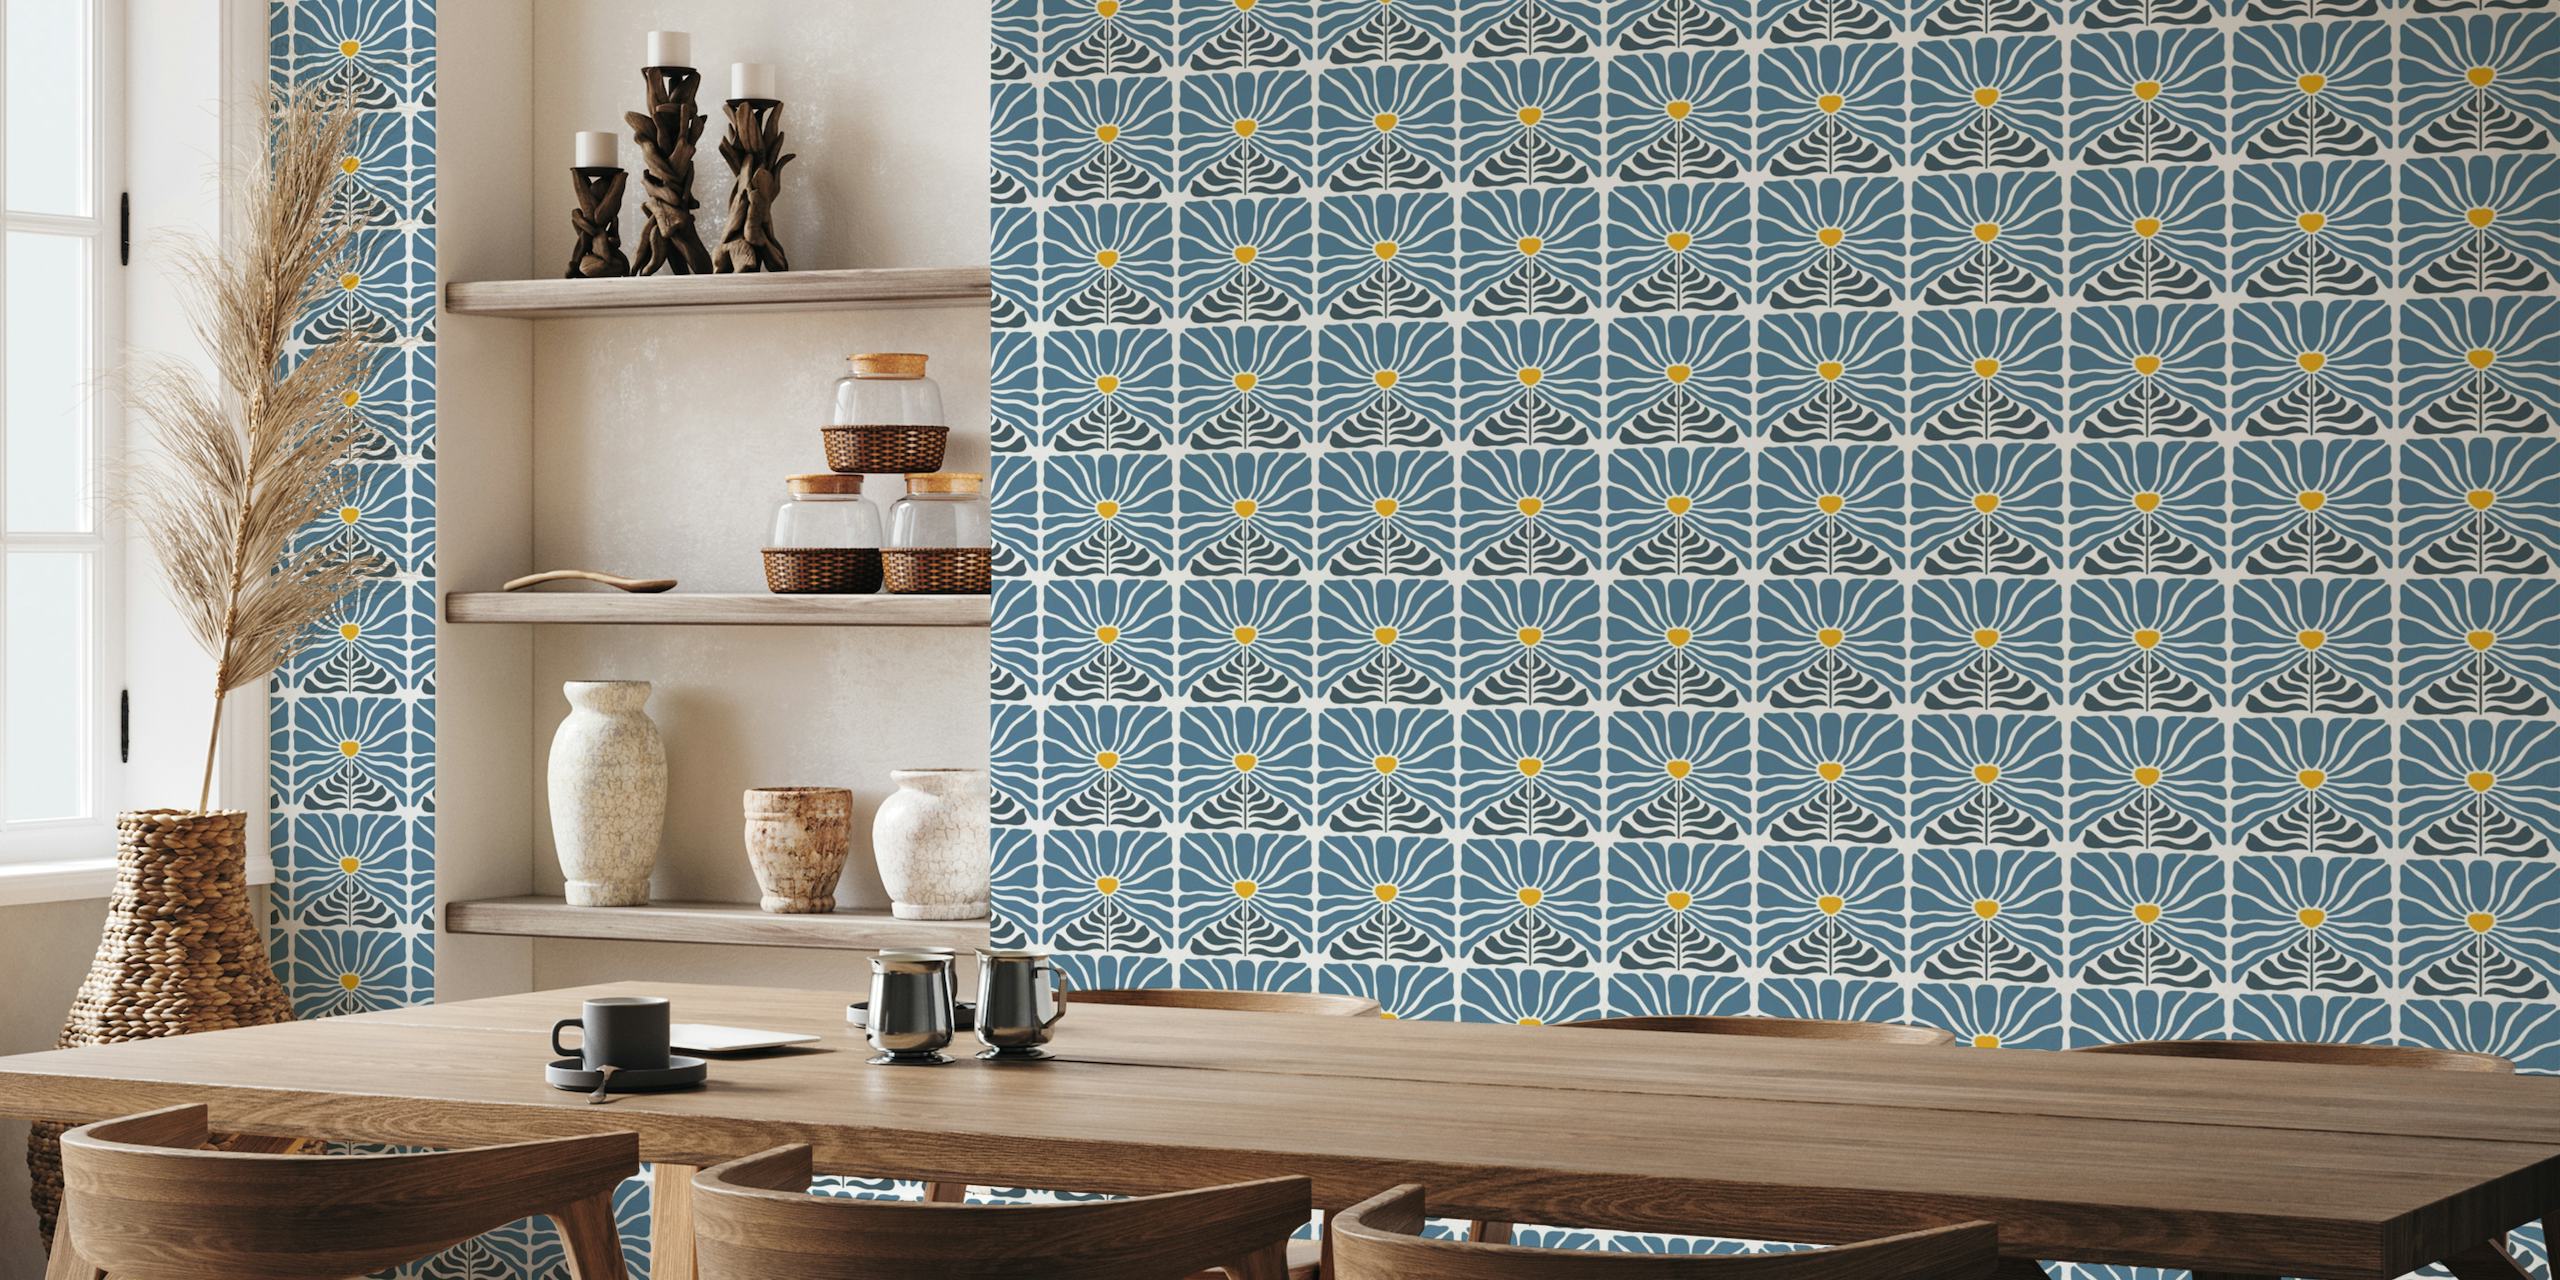 Vintage-inspired wall mural featuring blue flowers with yellow centers on a retro patterned background